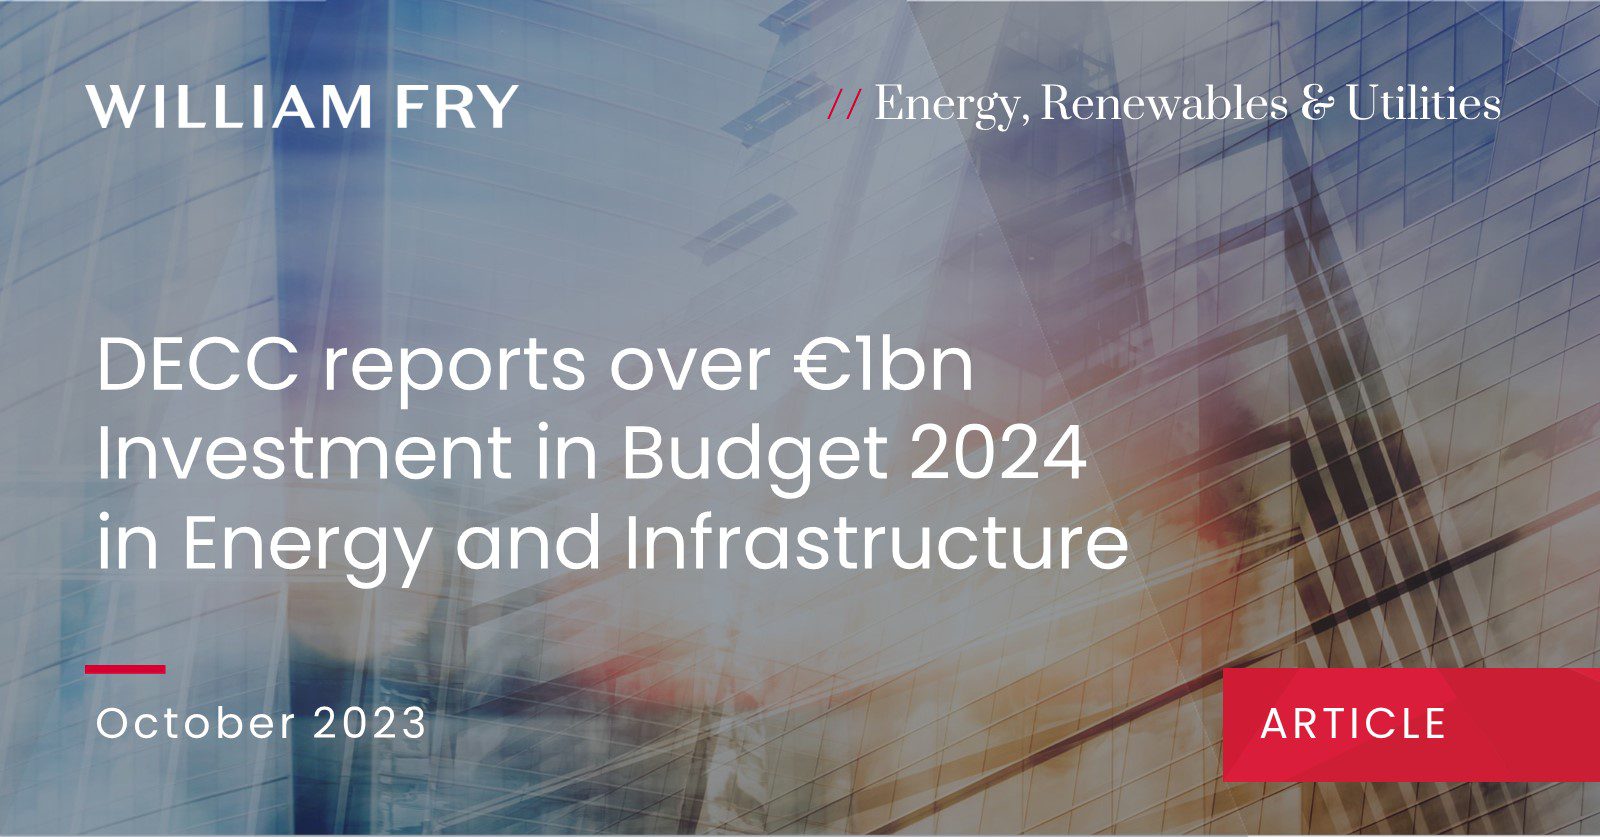 DECC reports over €1bn Investment in Budget 2024 in Energy and Infrastructure